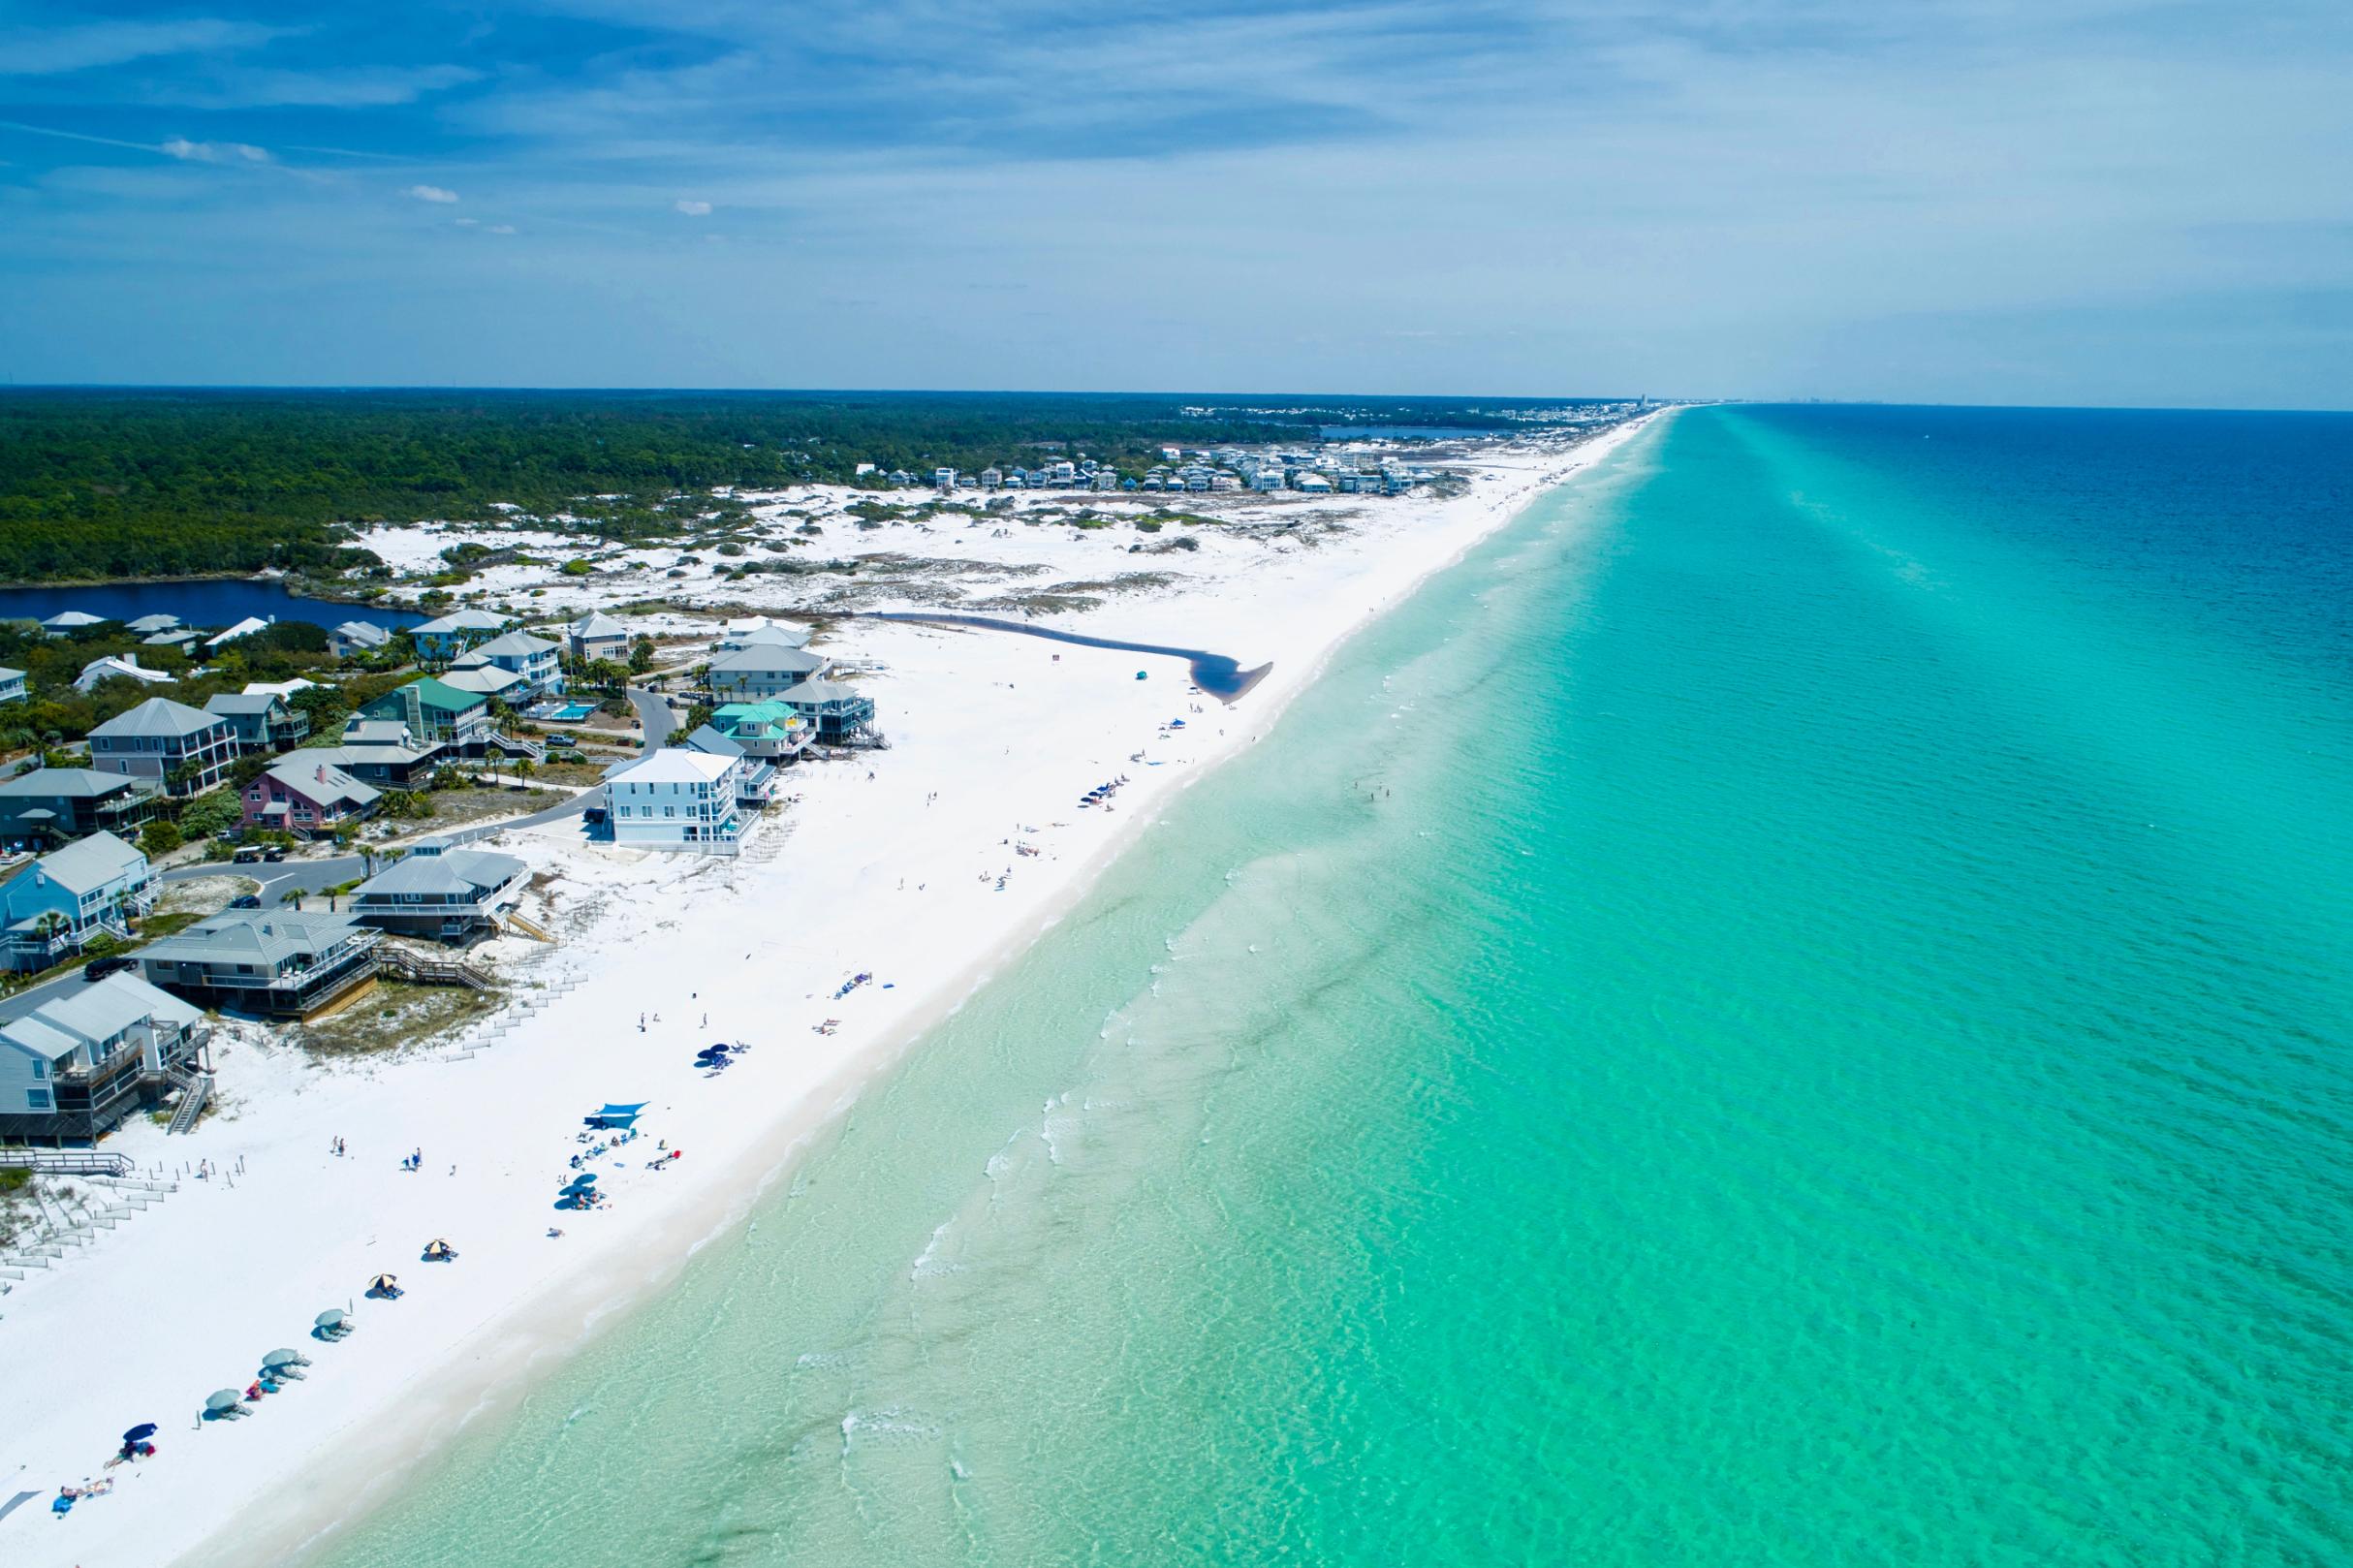 Top 10 Us Beaches For 2019 From Dr Beach Cnn Travel,Beautiful Love Rose Flower Images Free Download